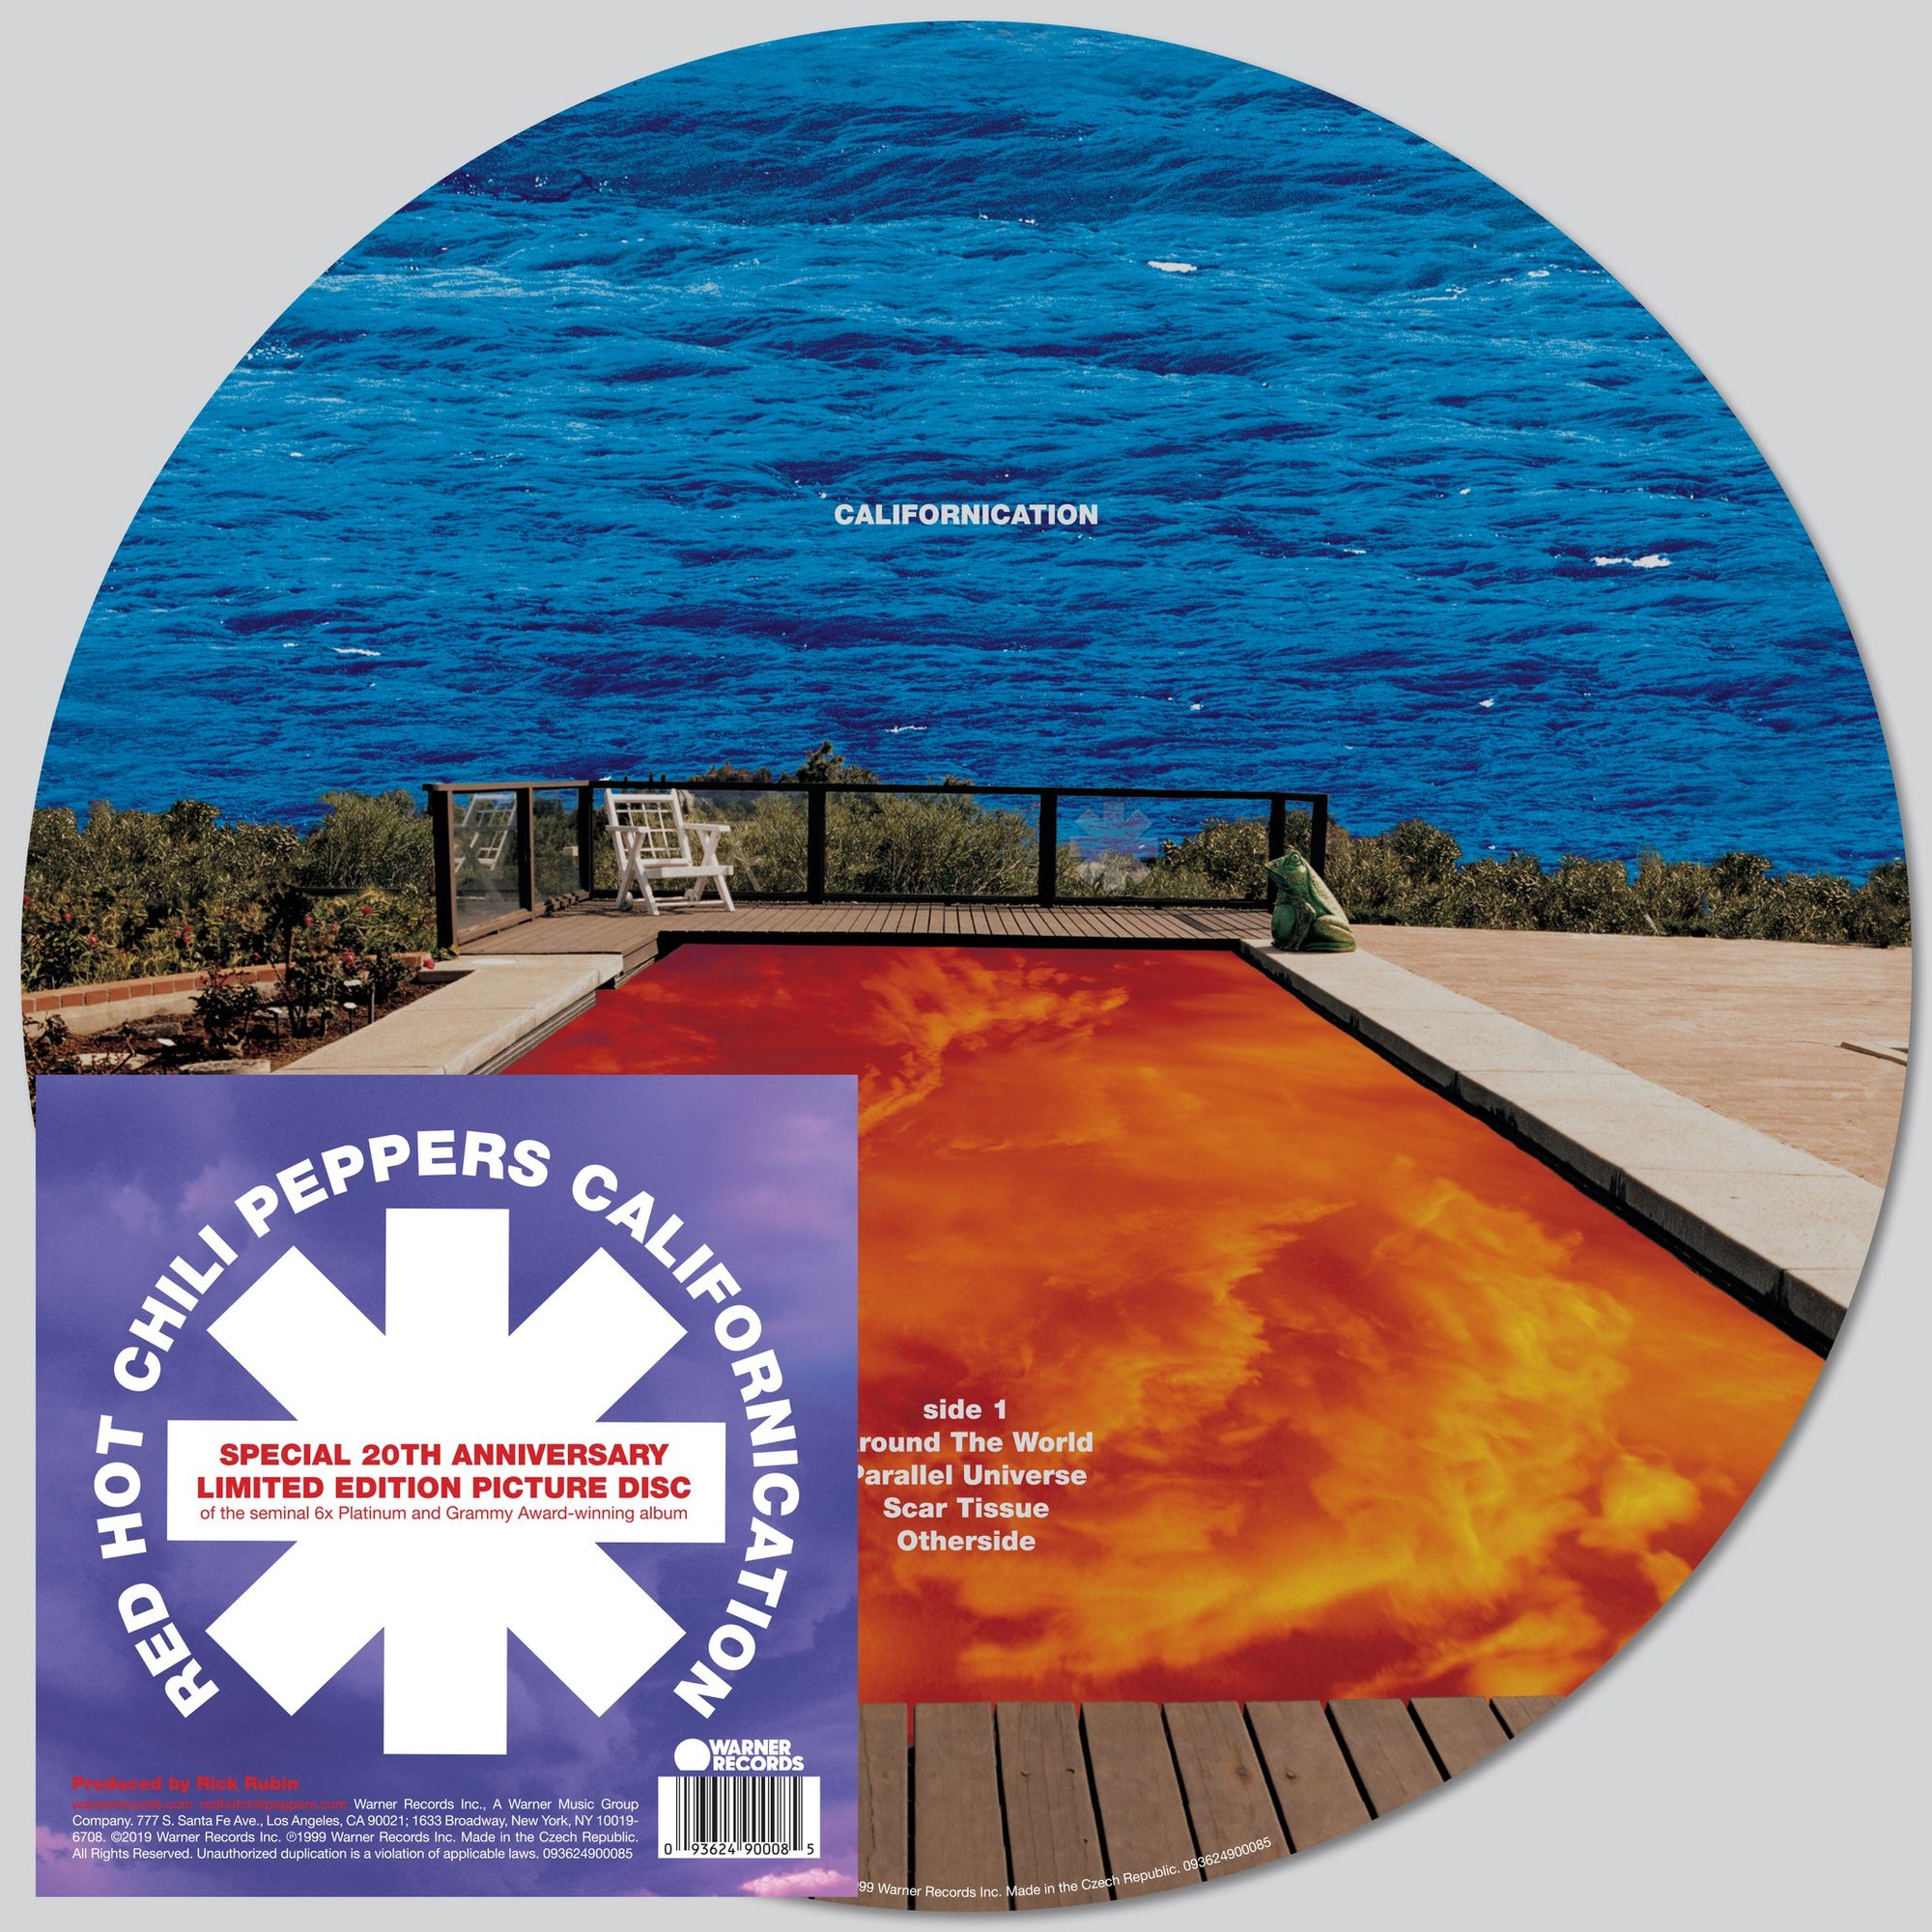 Californication (picture disc)